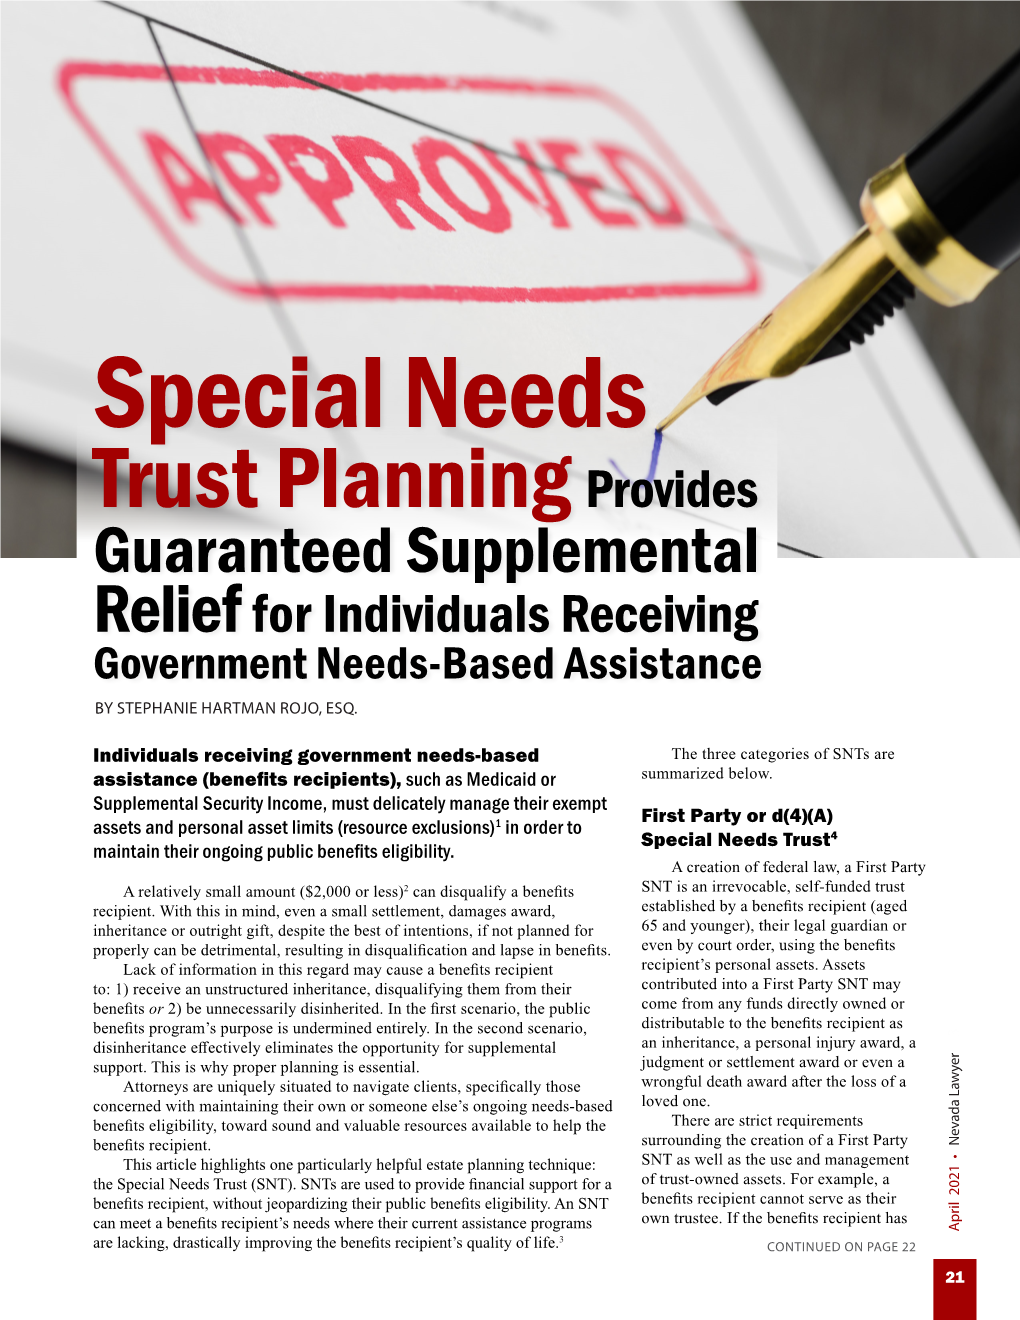 Special Needs Trust Planning Provides Guaranteed Supplemental Relief for Individuals Receiving Government Needs-Based Assistance by STEPHANIE HARTMAN ROJO, ESQ